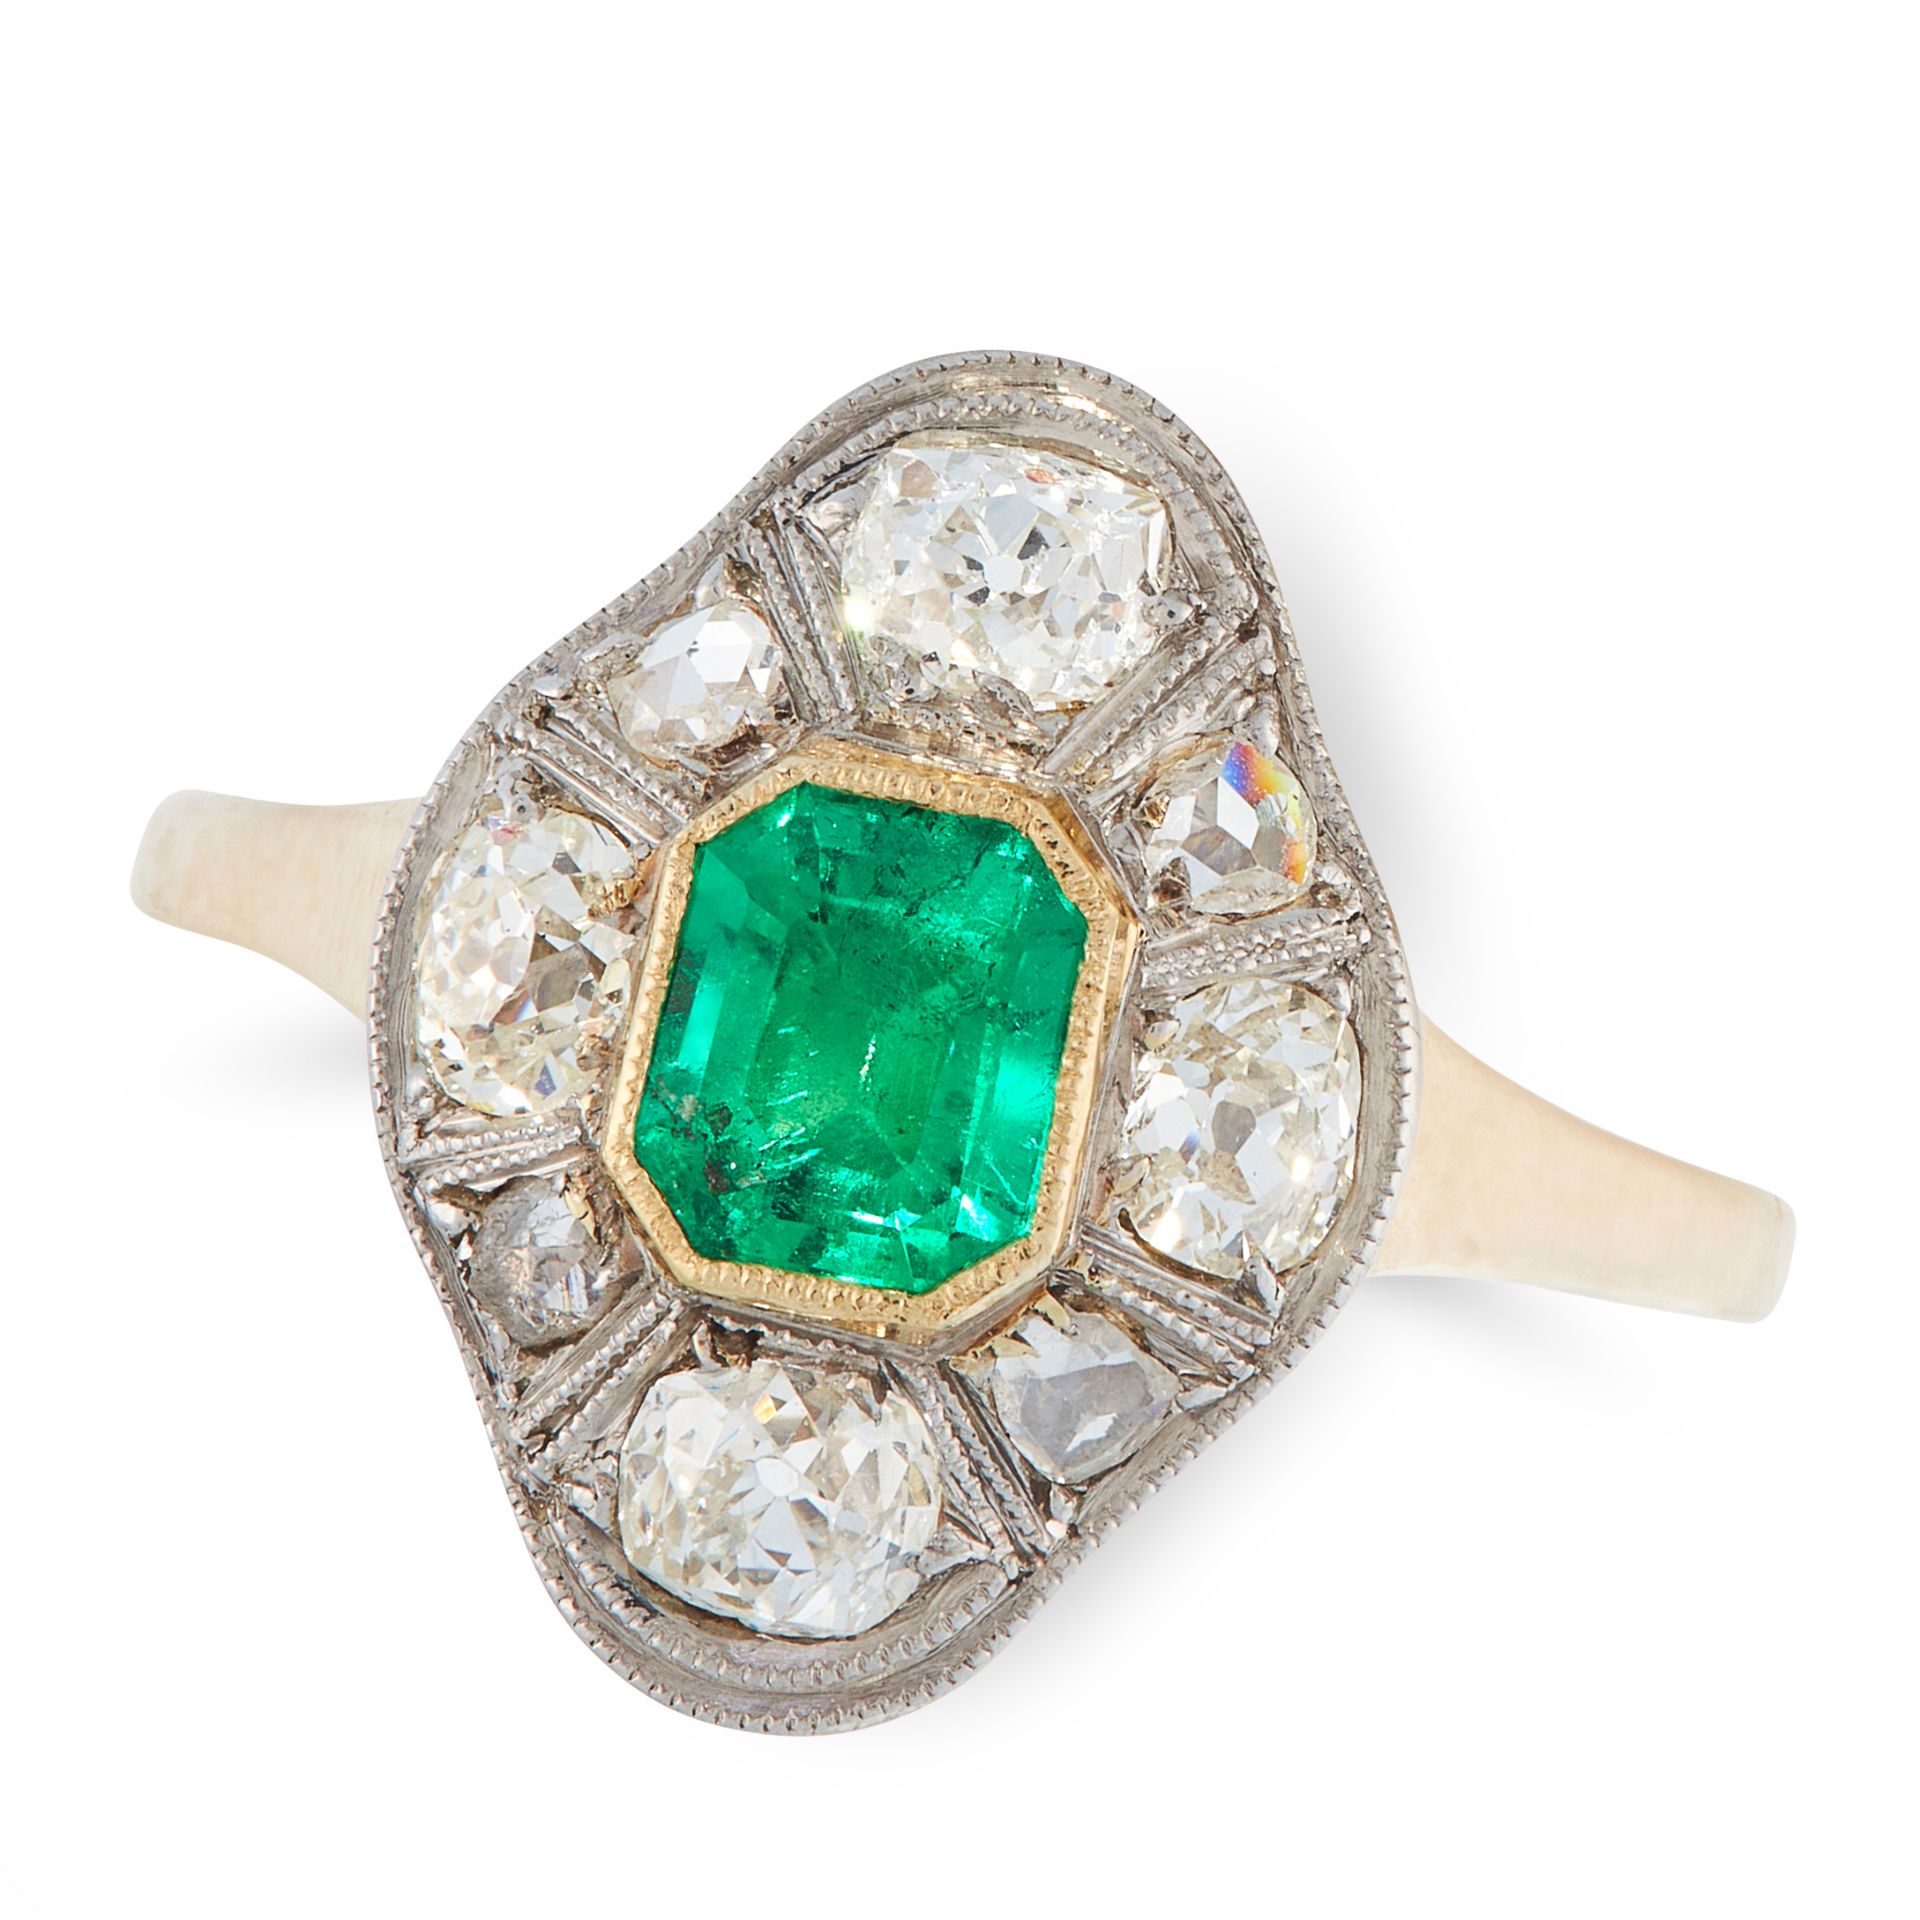 A COLOMNBIAN EMERALD AND DIAMOND DRESS RING, CIRCA 1940 in 14ct yellow gold, the navette shaped face